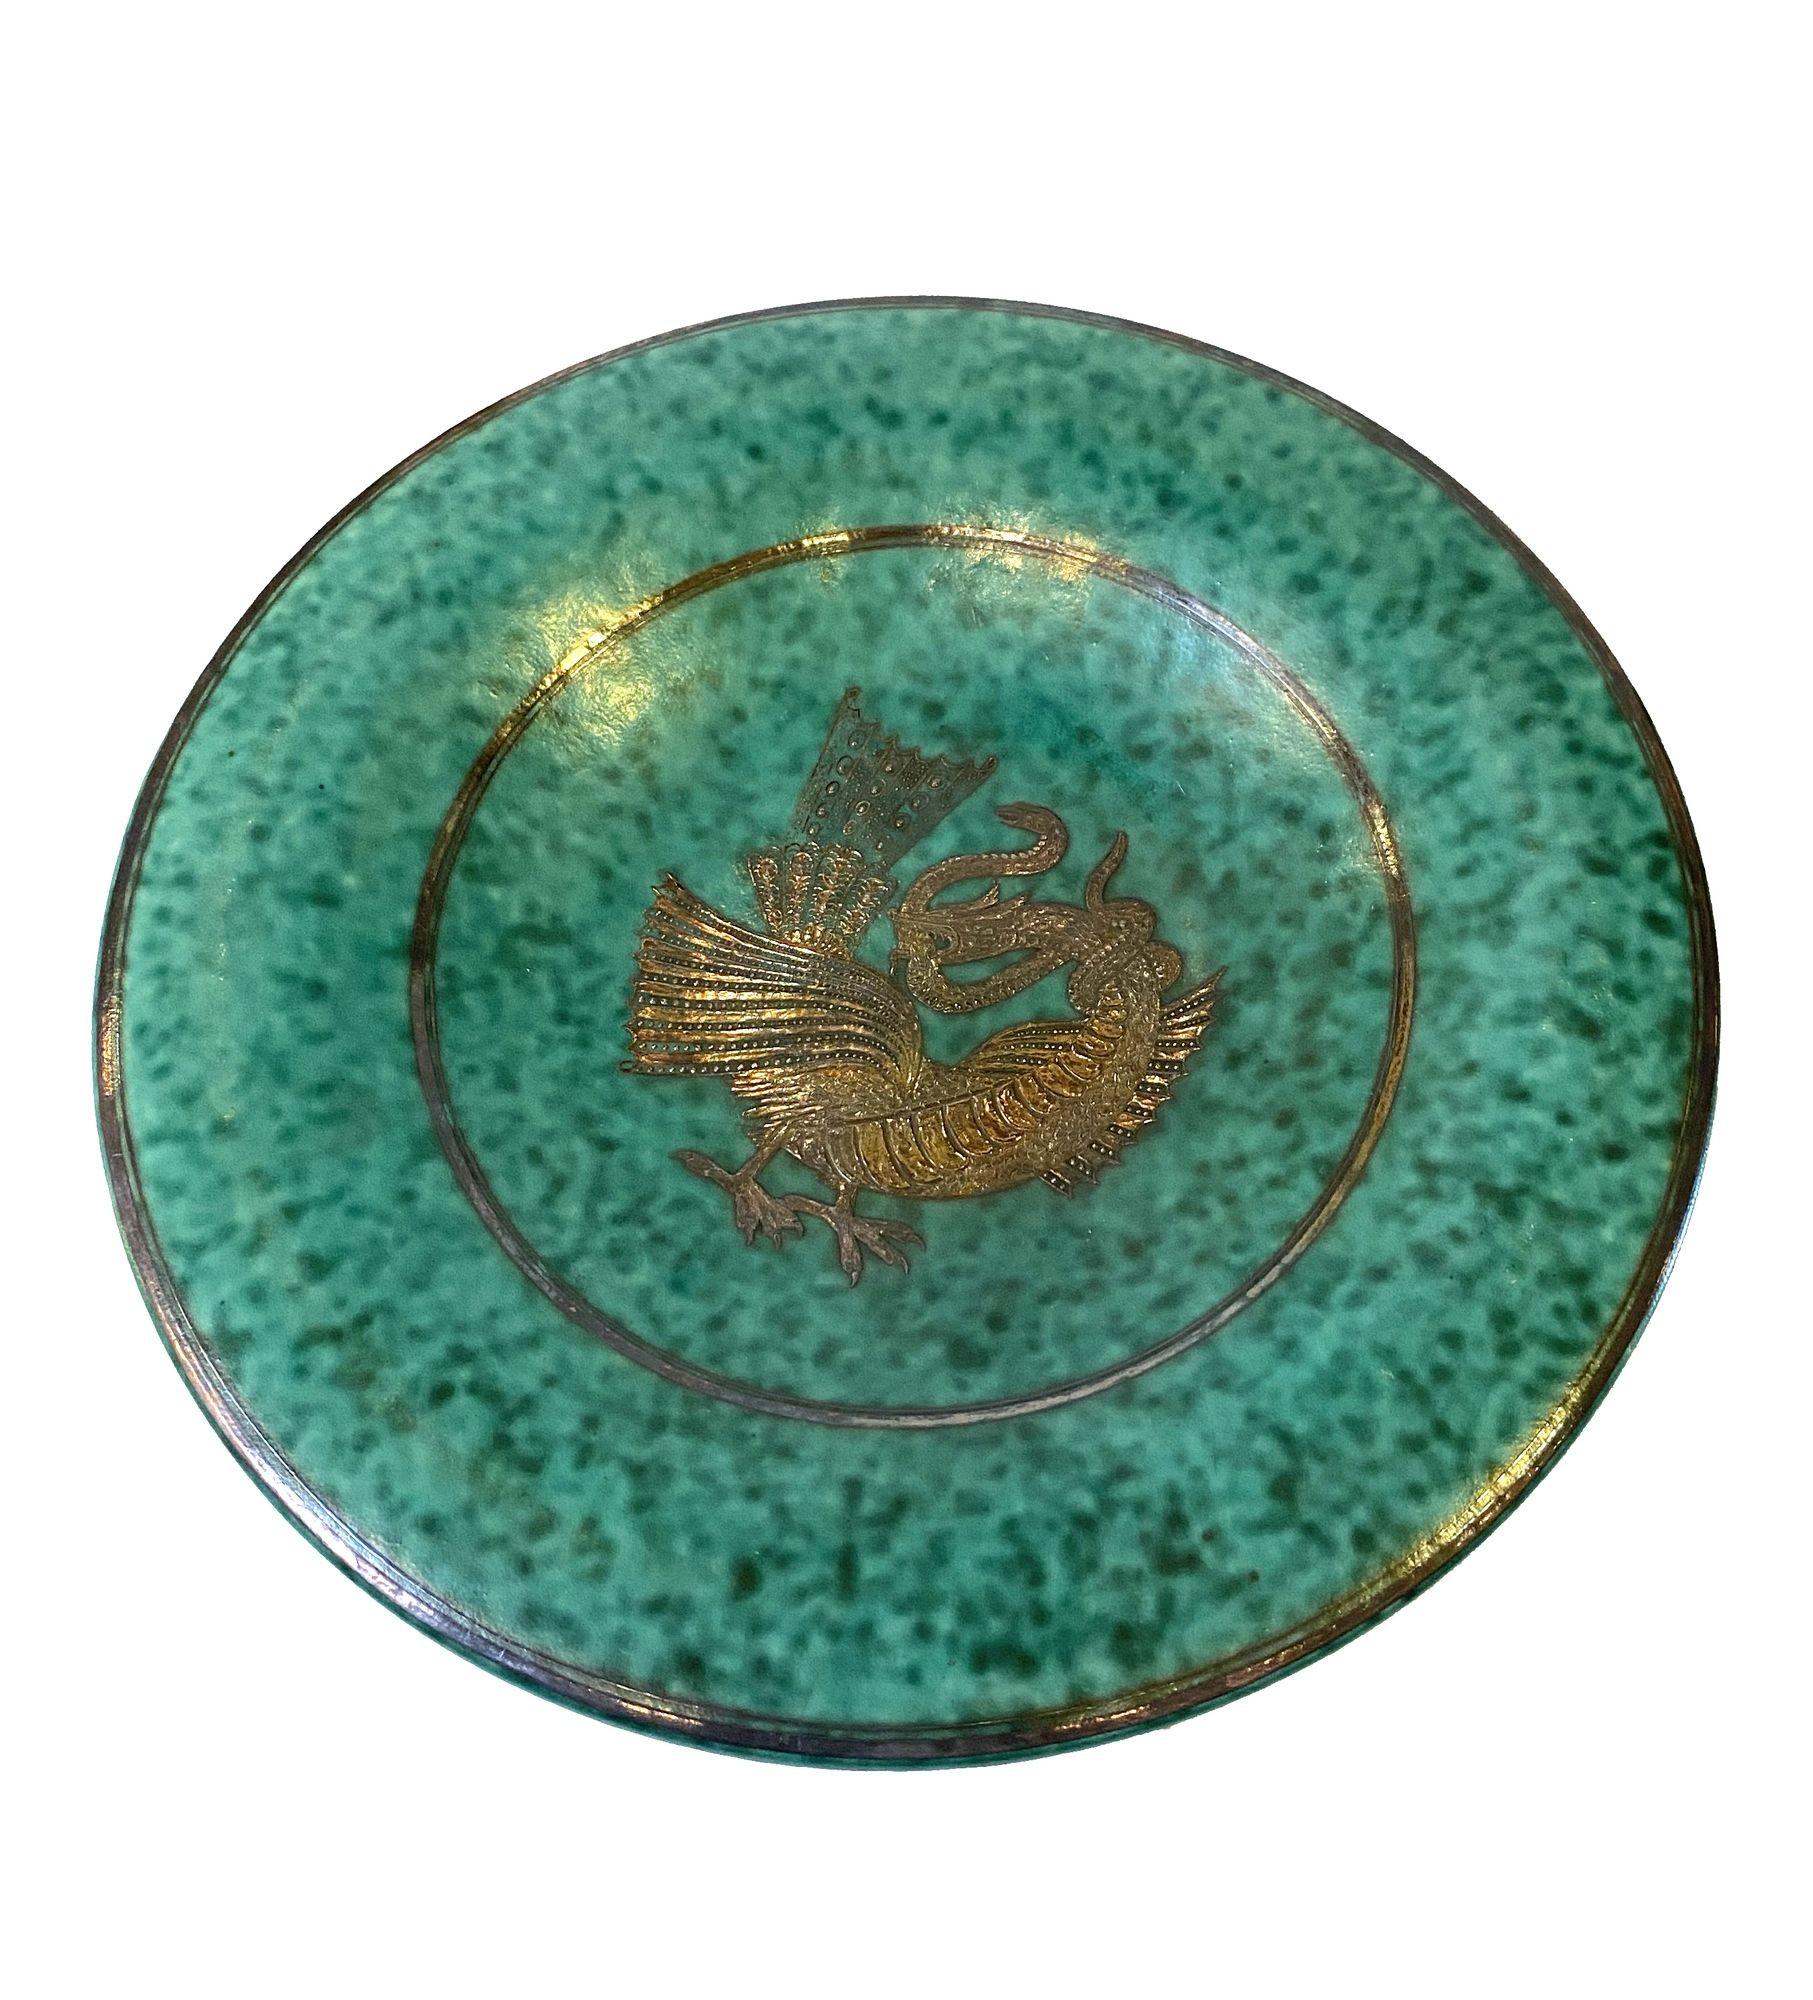 Pair of two round in rich turquoise glaze with silver overlay, provenance- collection of Howard Rothberg, can be sold individually.